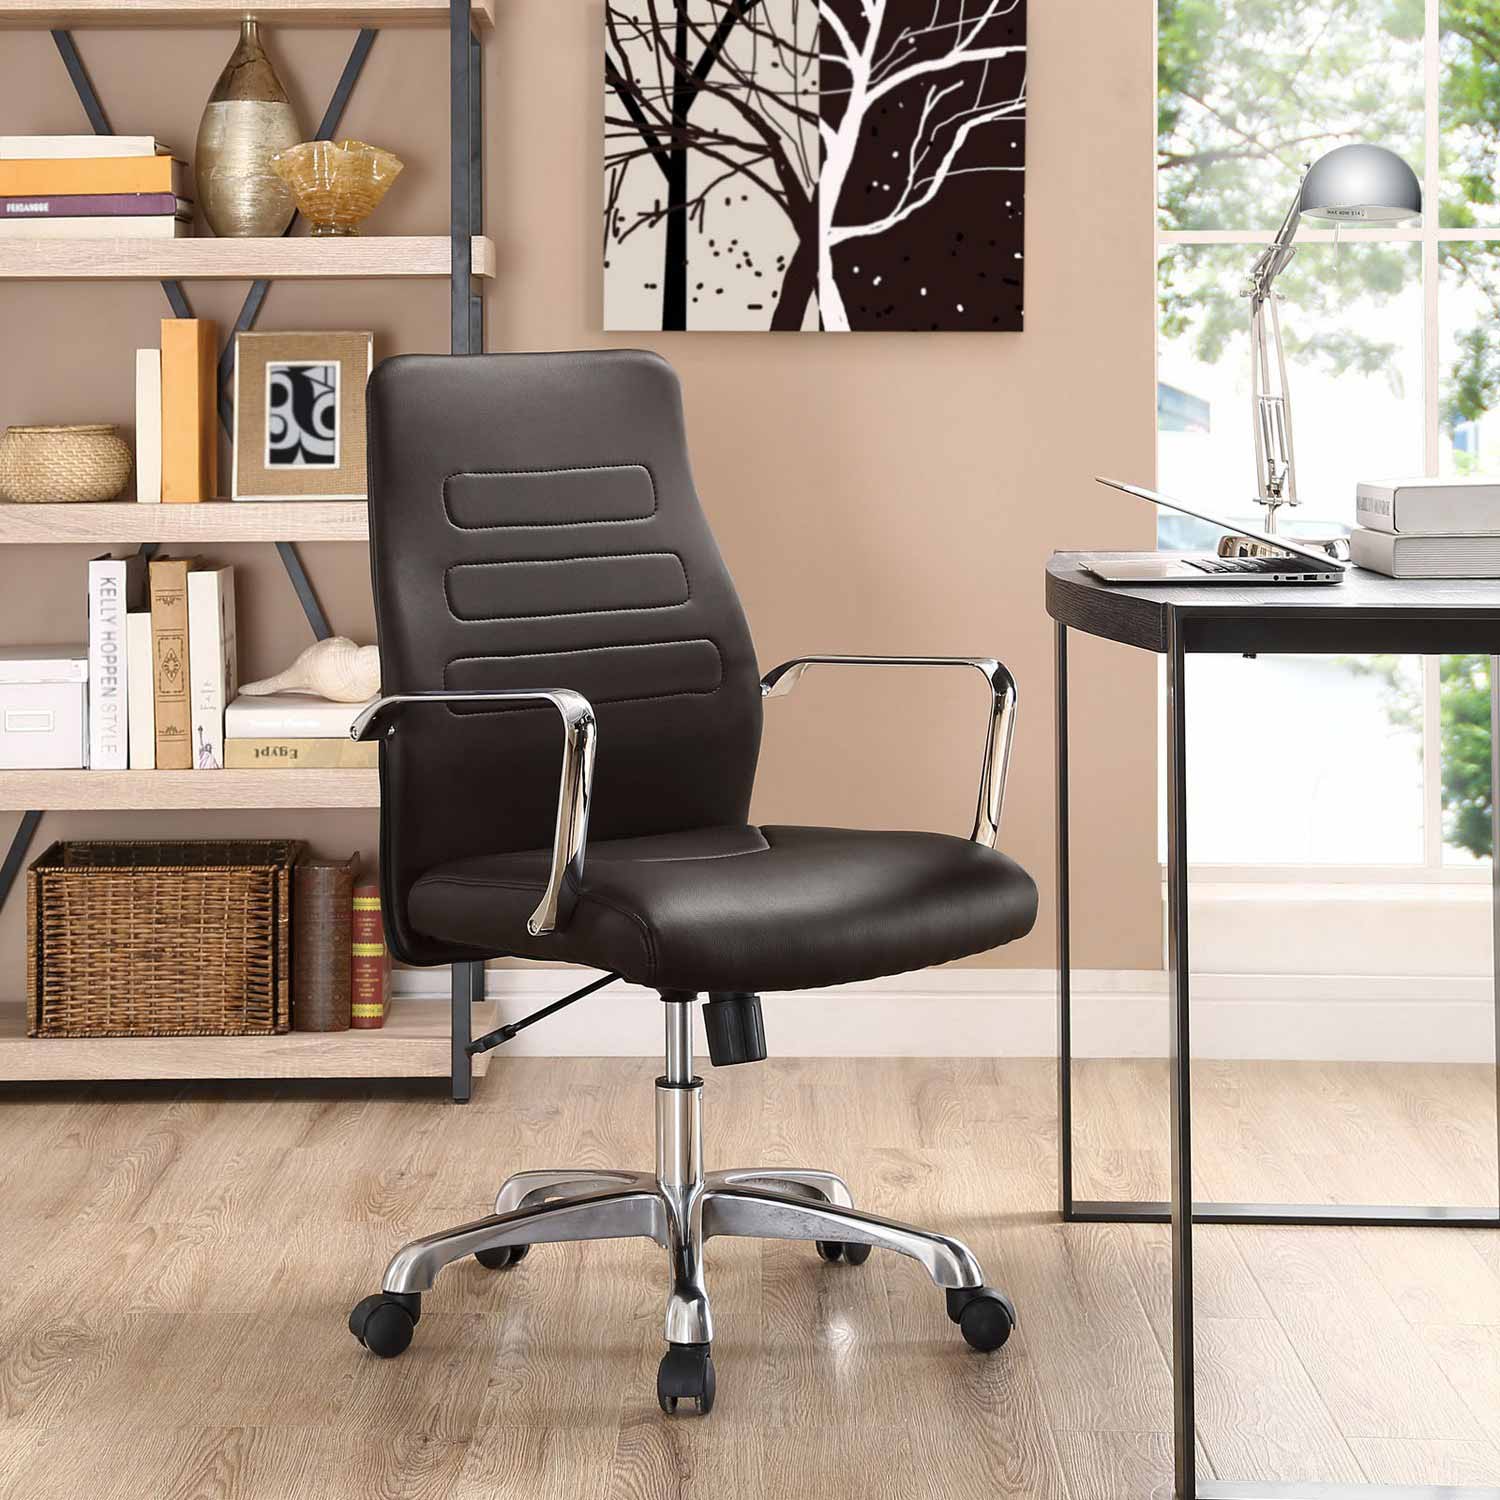 Modway Depict Mid Back Aluminum Office Chair - Brown